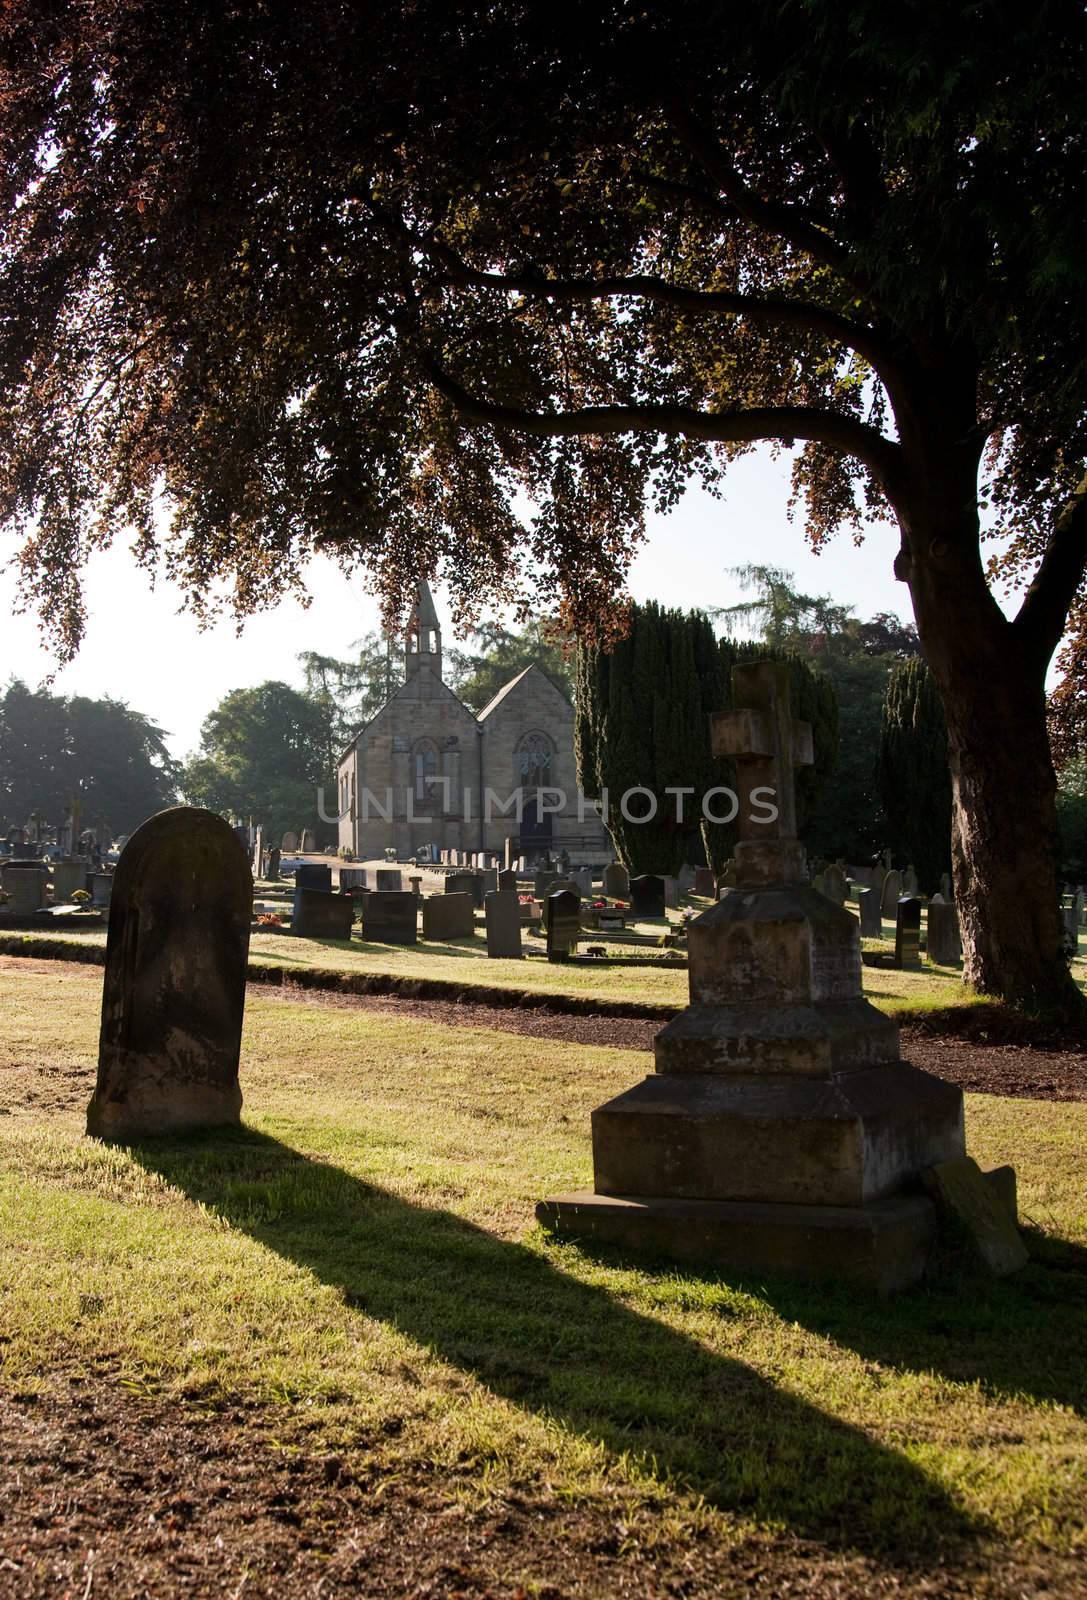 Backlit view of gravestones with church by steheap